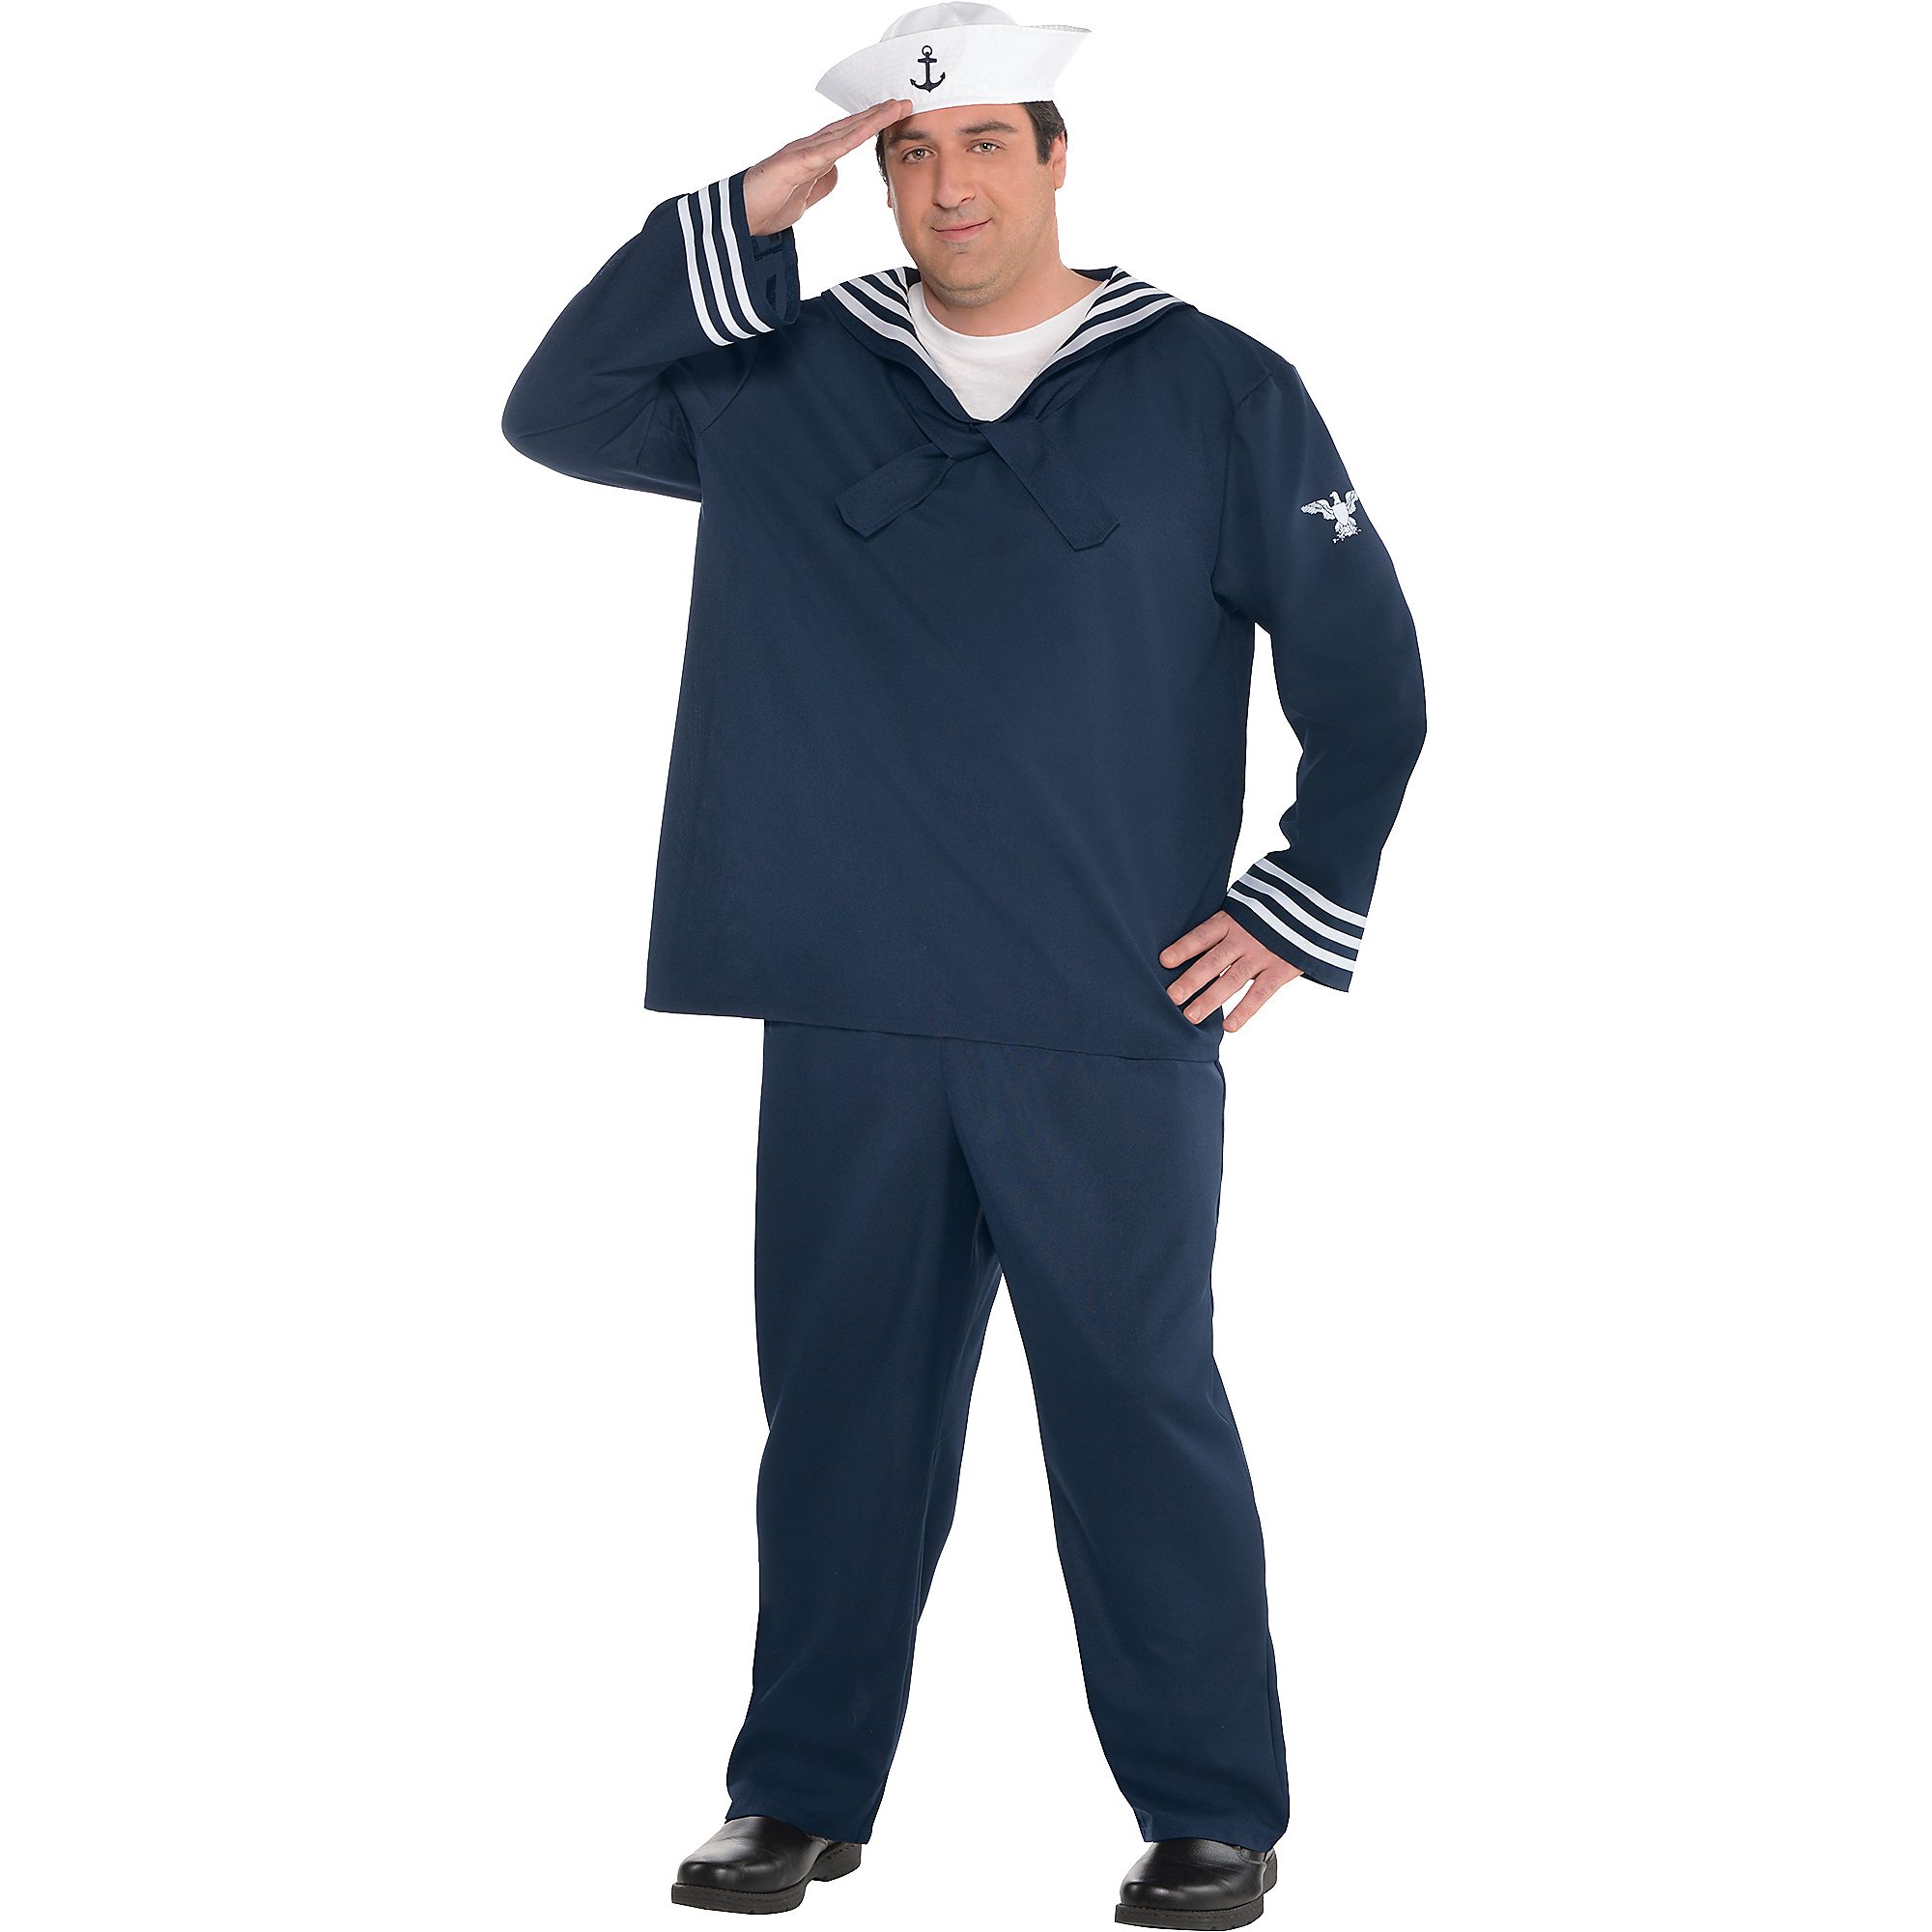 Out to Sea Sailor Halloween Costume for Men, Plus Size 809801810814 | eBay